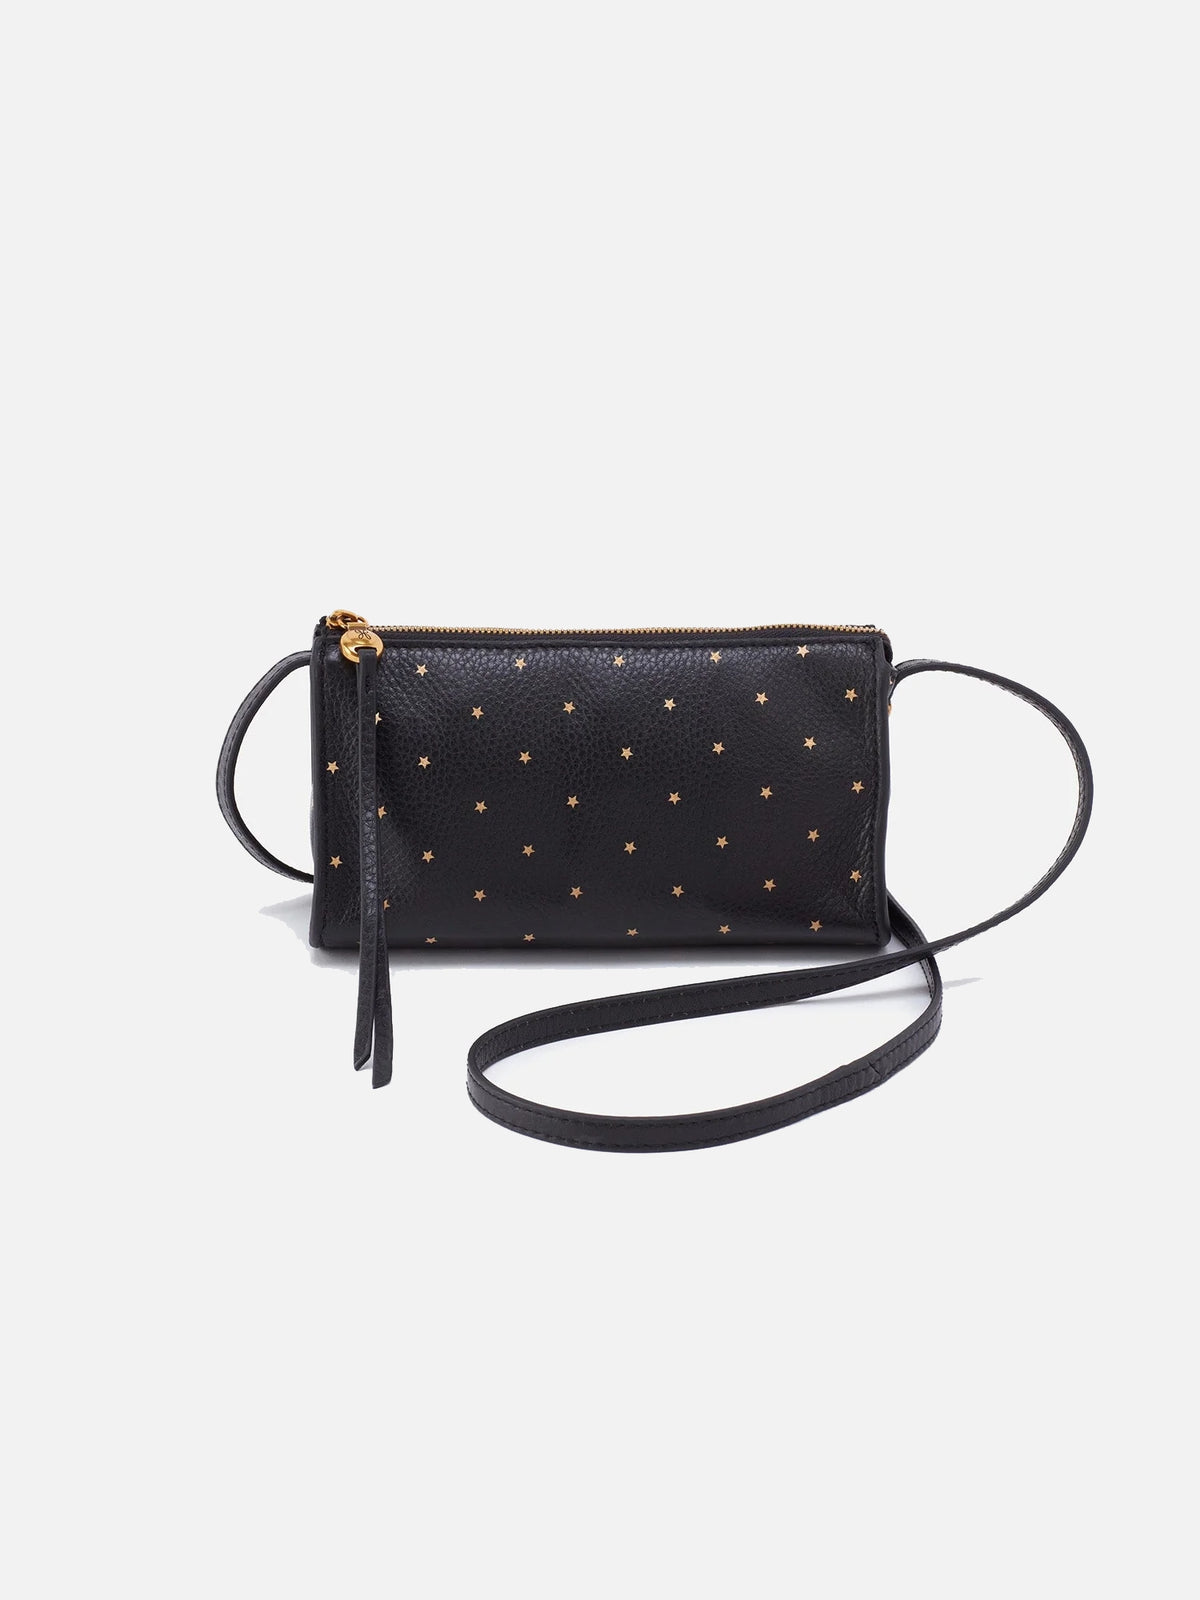 hobo jewel crossbody bag in printed pebbled leather black and gold stars